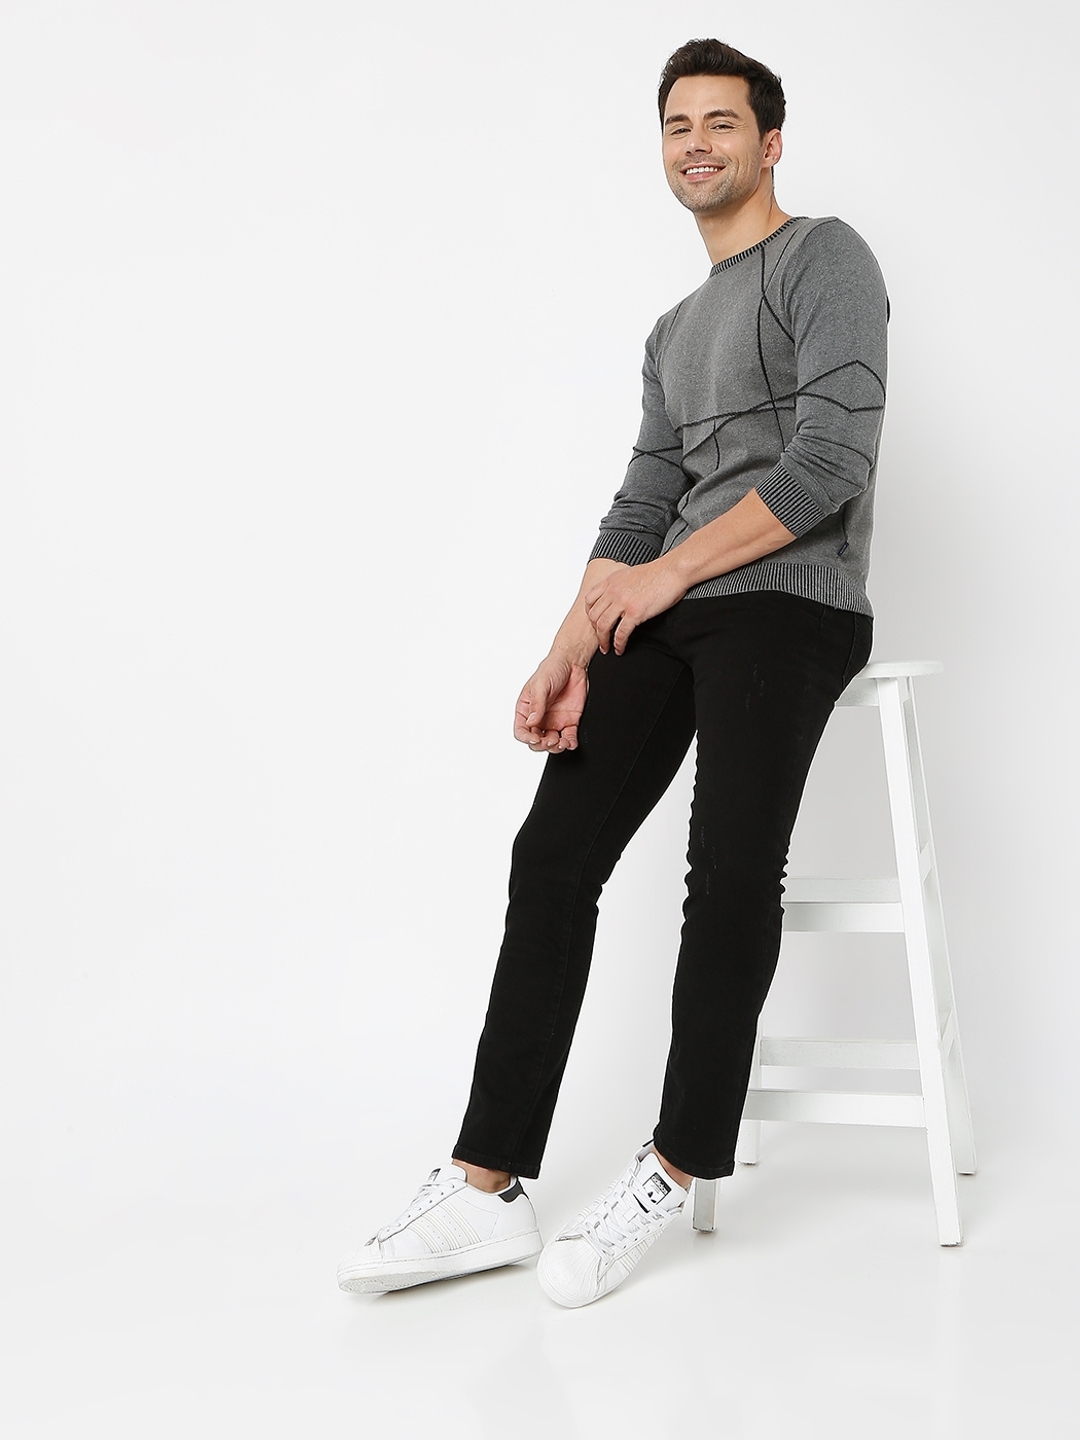 Men's COOPER IN knitted slim fit sweater